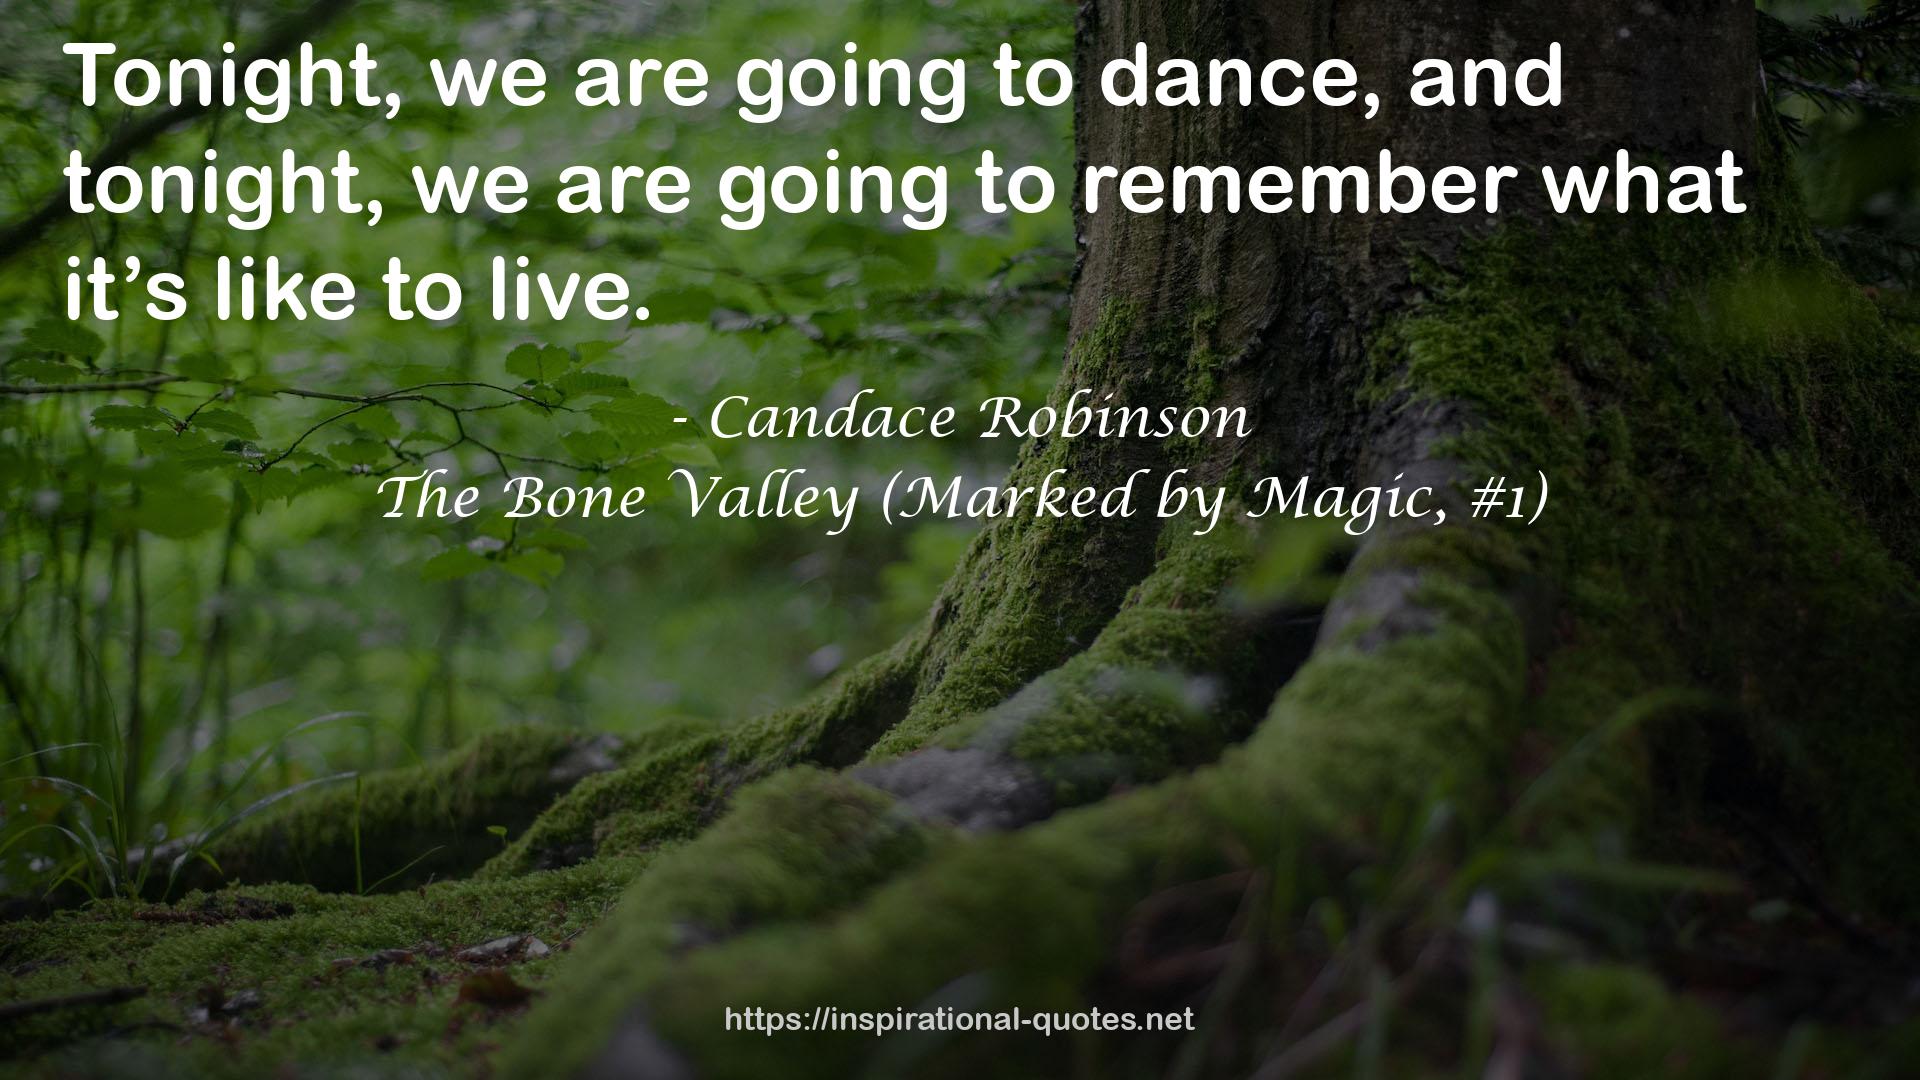 The Bone Valley (Marked by Magic, #1) QUOTES